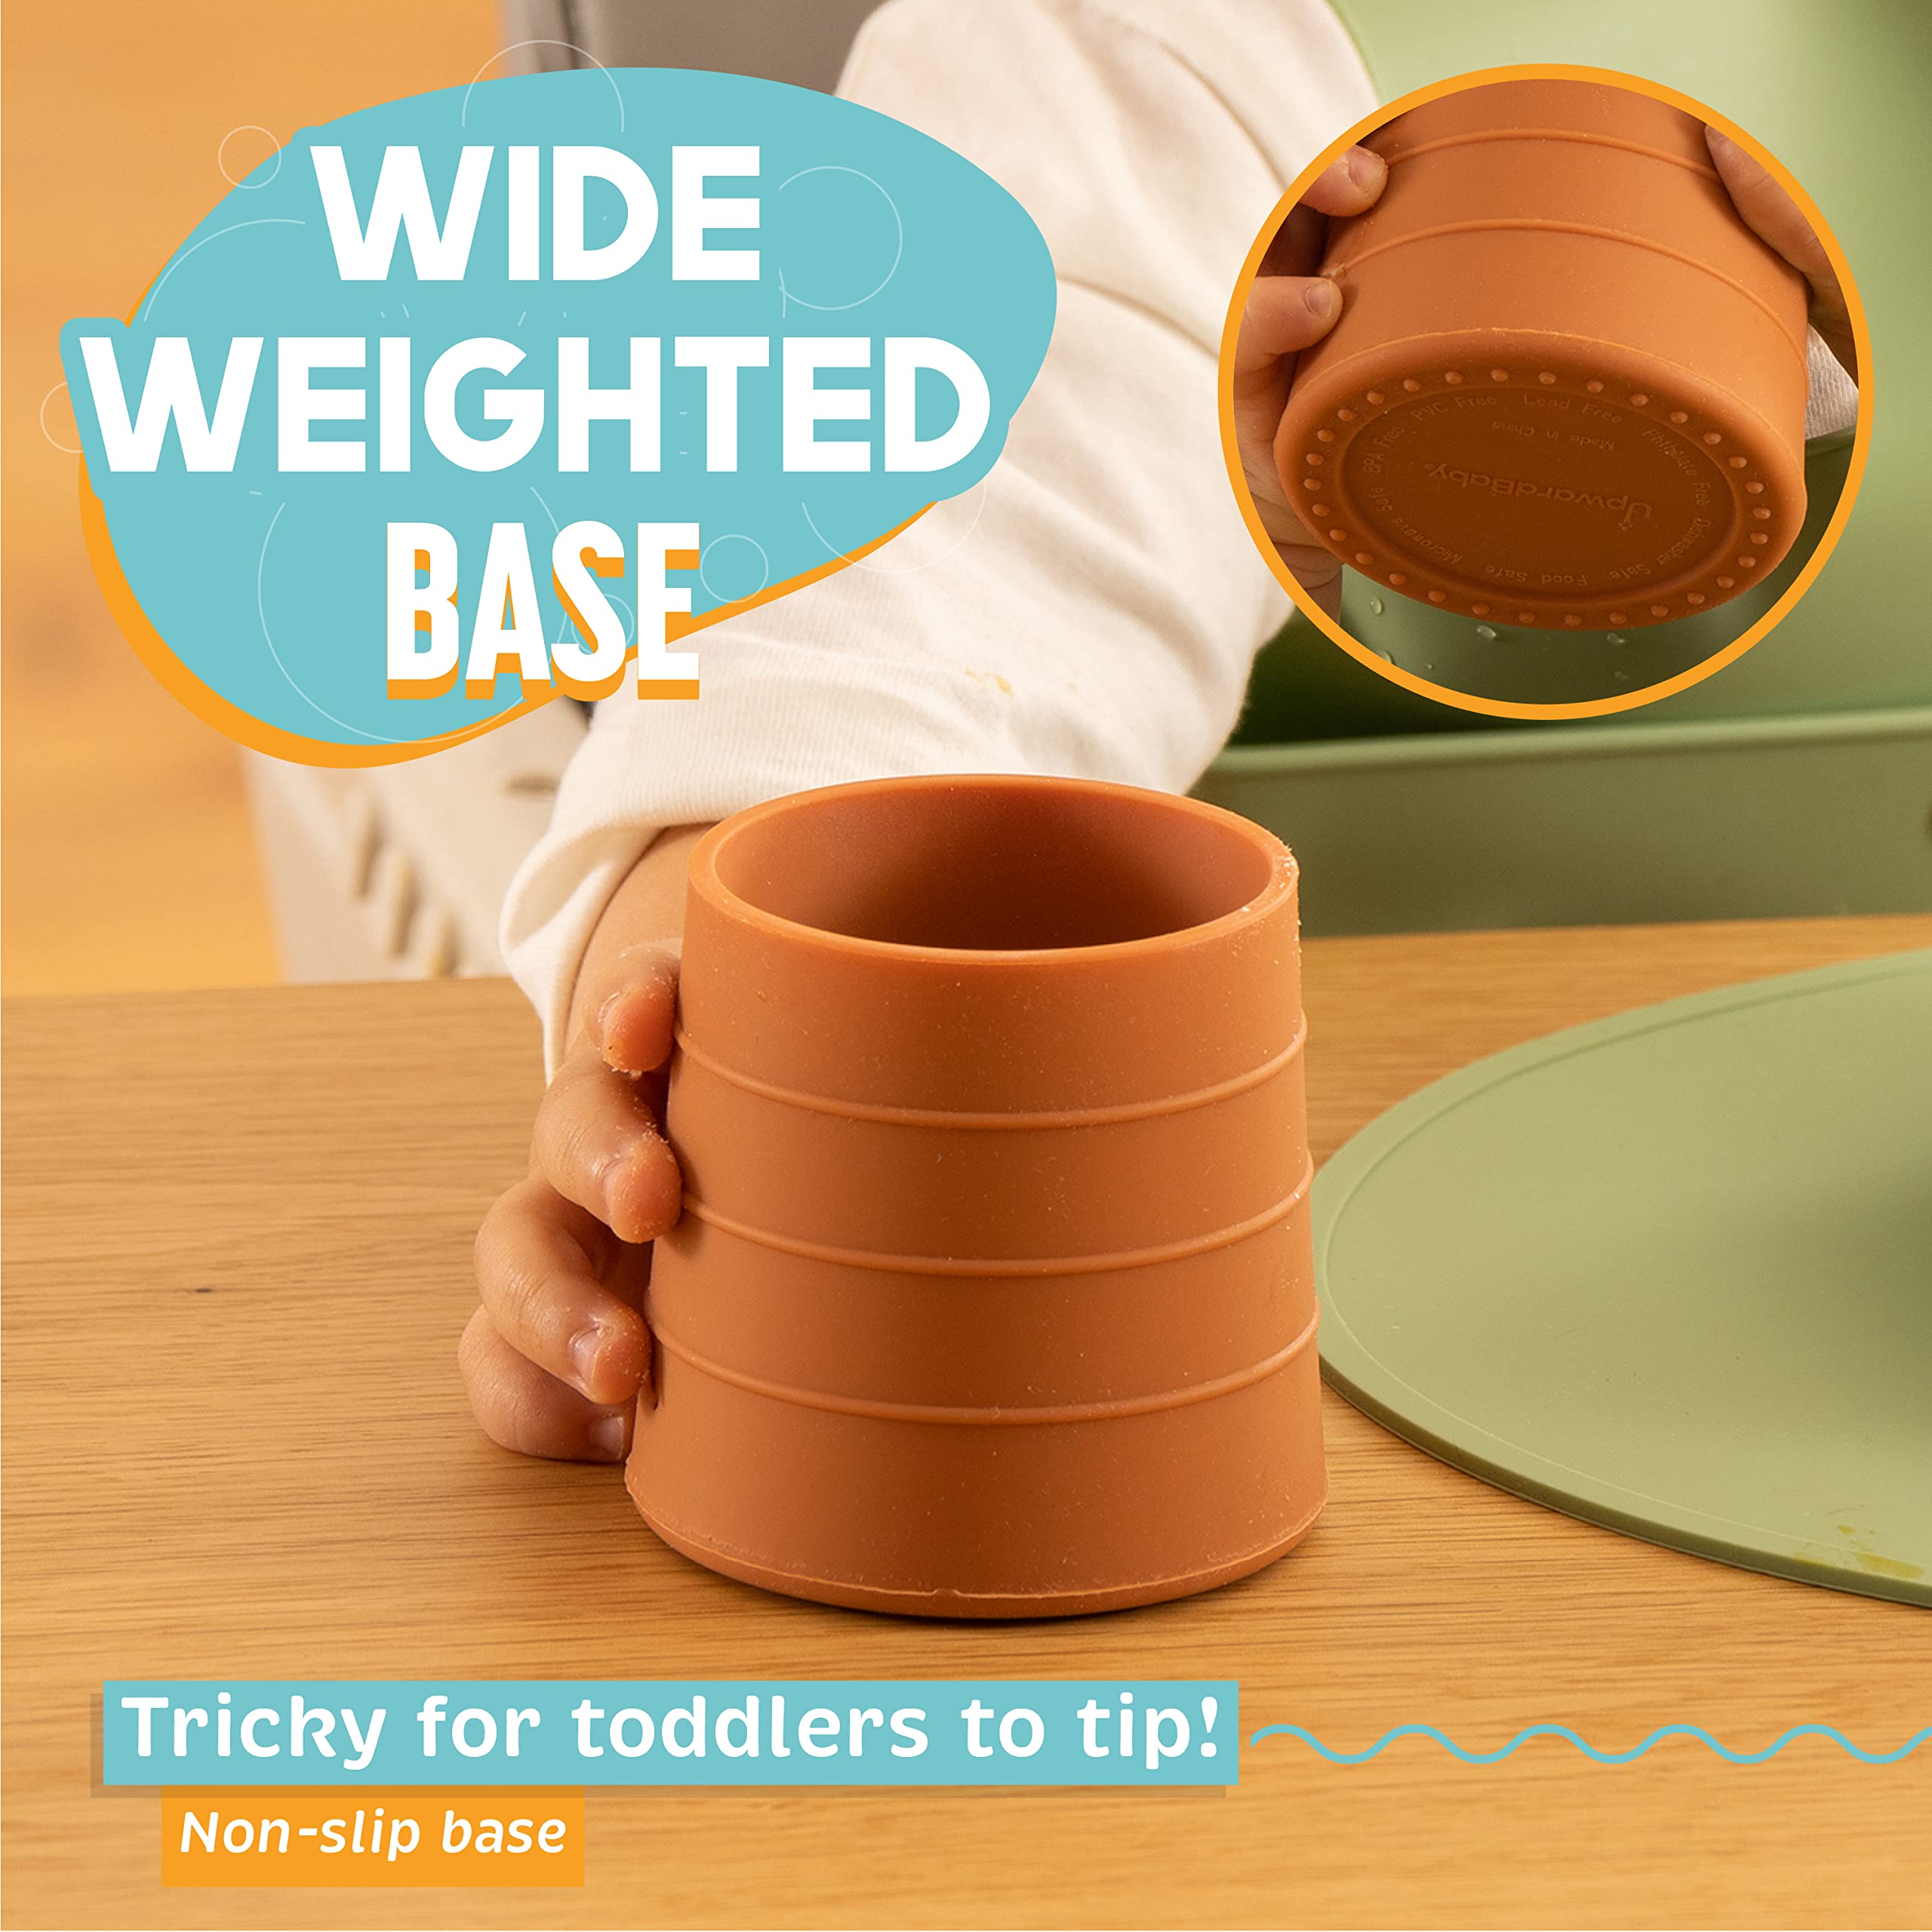 Upward Baby Led Weaning Supplies 6-12 Months Eating Utensils - First Solids Infant Feeding Set - Suction Bowls Baby Plates Dishes Toddler Spoons and Cup with Silicone Bibs - Self Eating Essentials